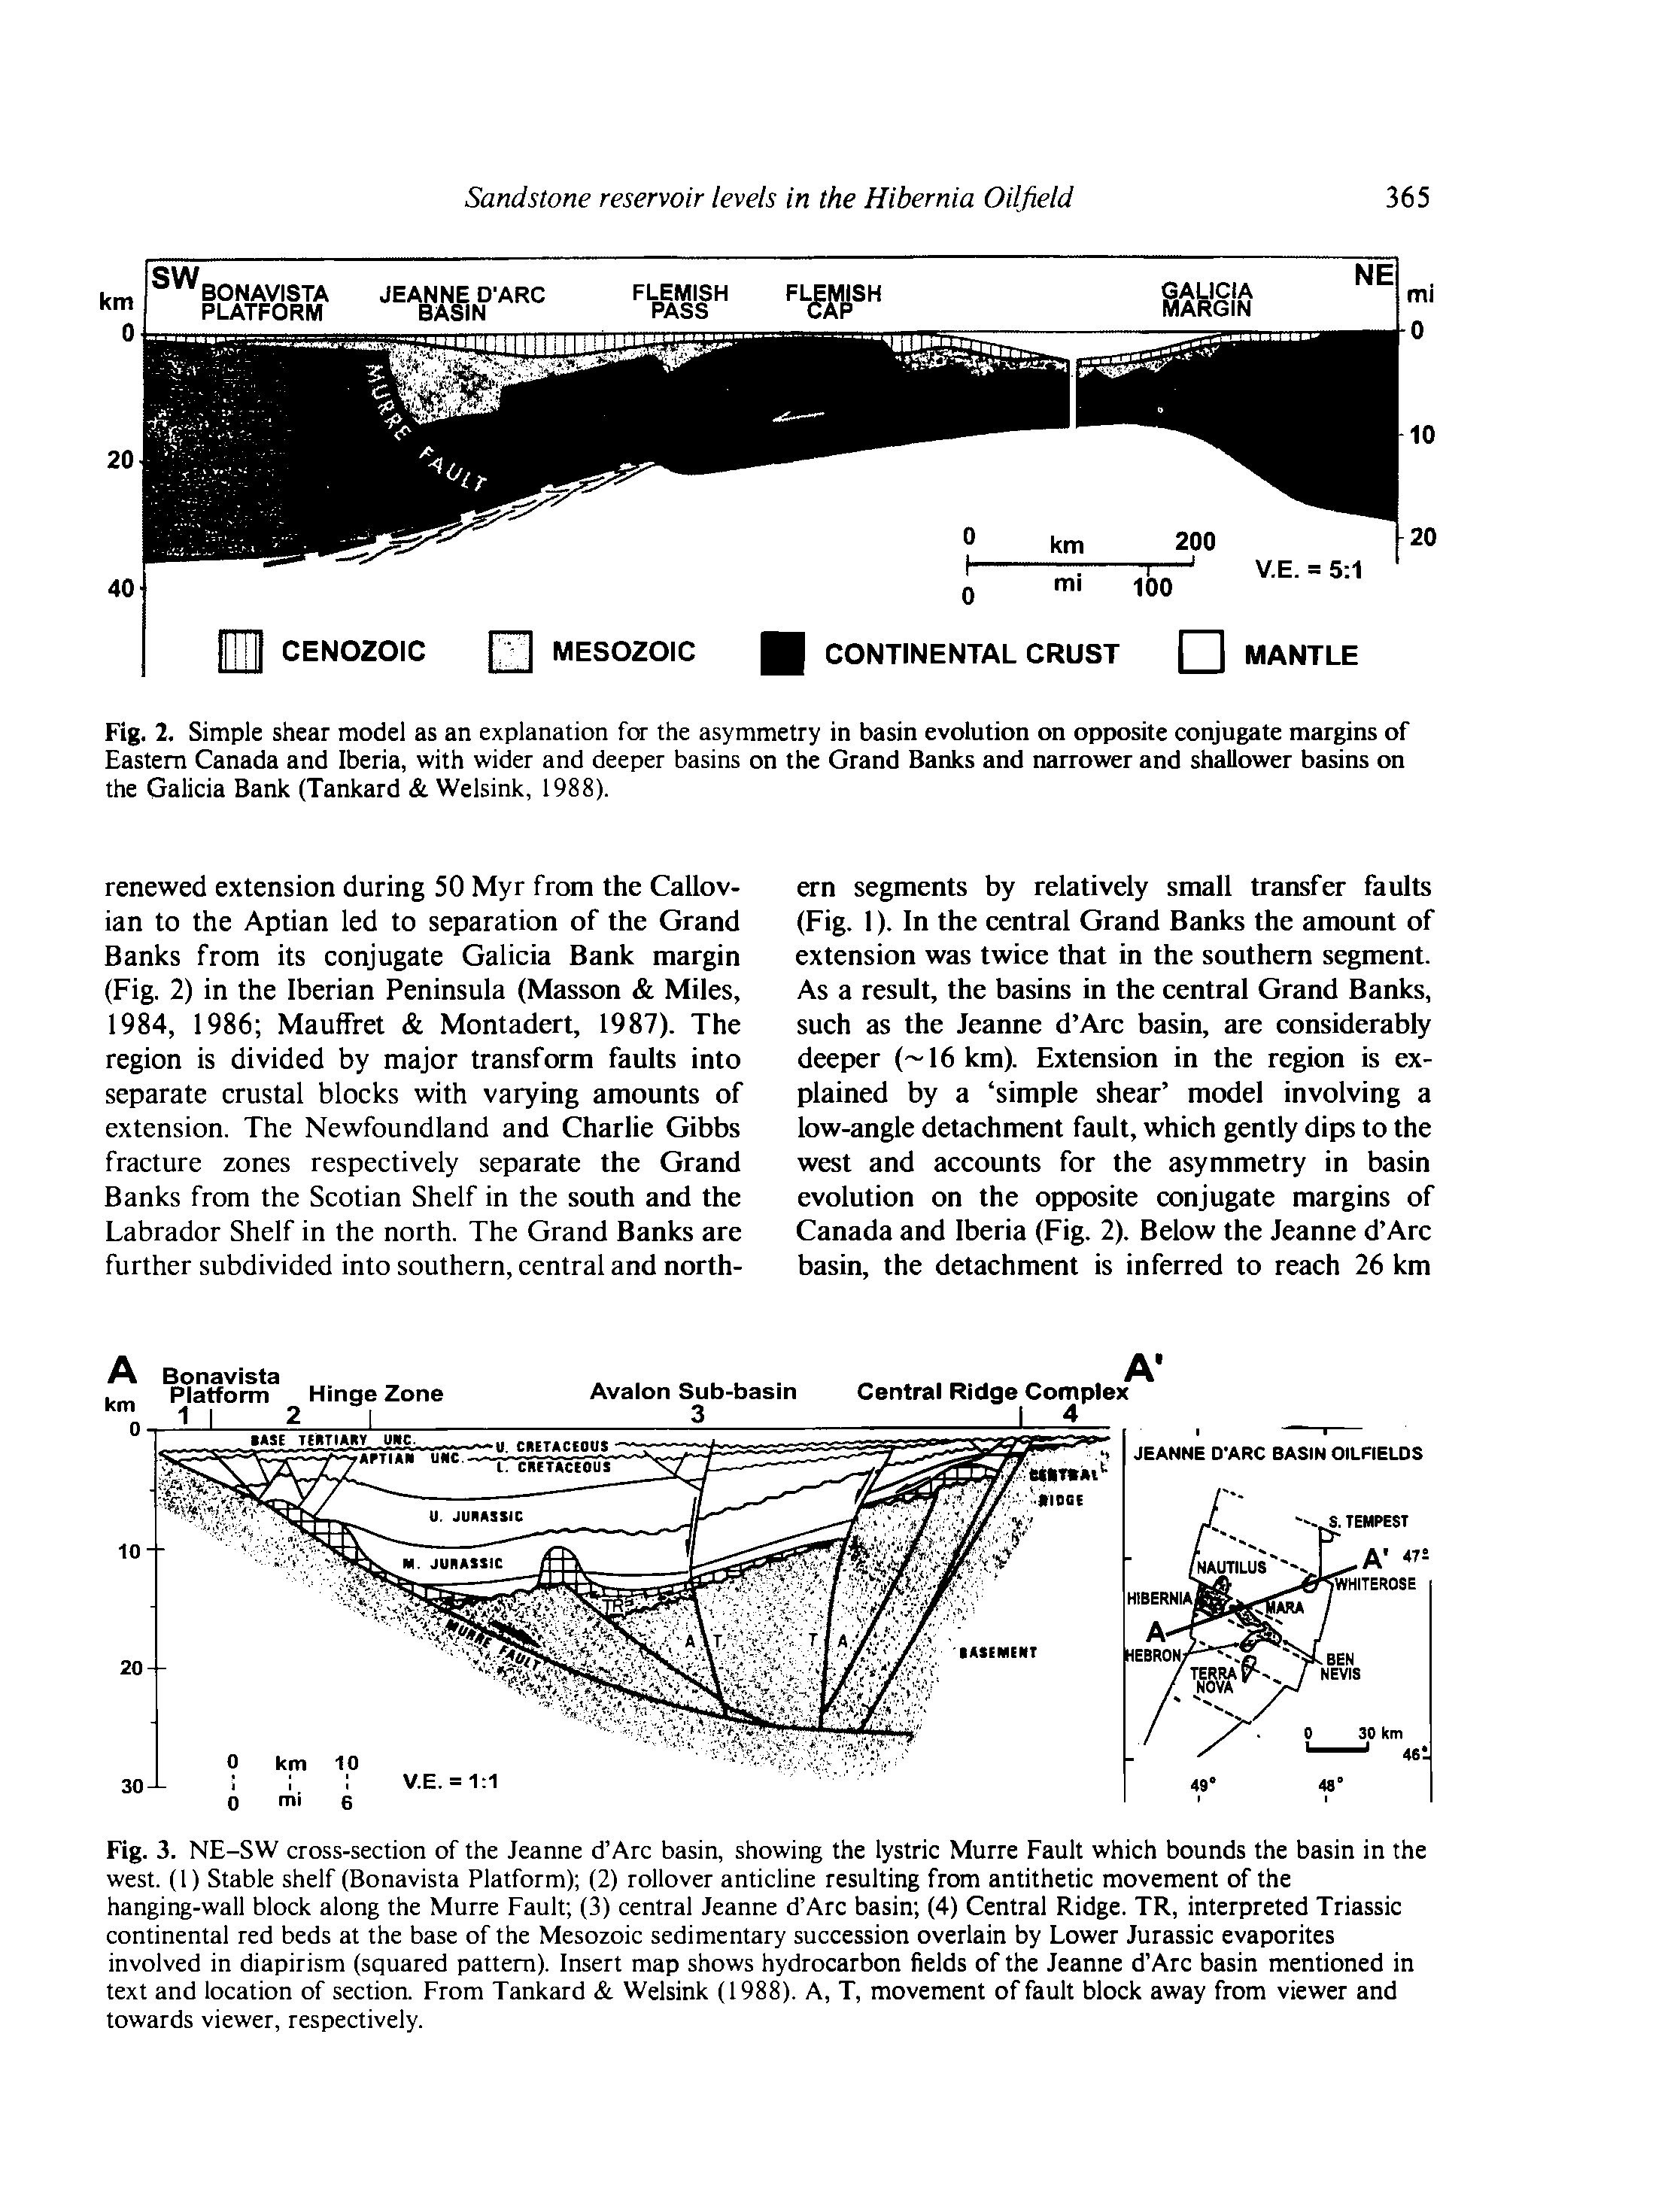 Fig. 2. Simple shear model as an explanation for the asymmetry in basin evolution on opposite conjugate margins of Eastern Canada and Iberia, with wider and deeper basins on the Grand Banks and narrower and shallower basins on the Galicia Bank (Tankard Welsink, 1988).